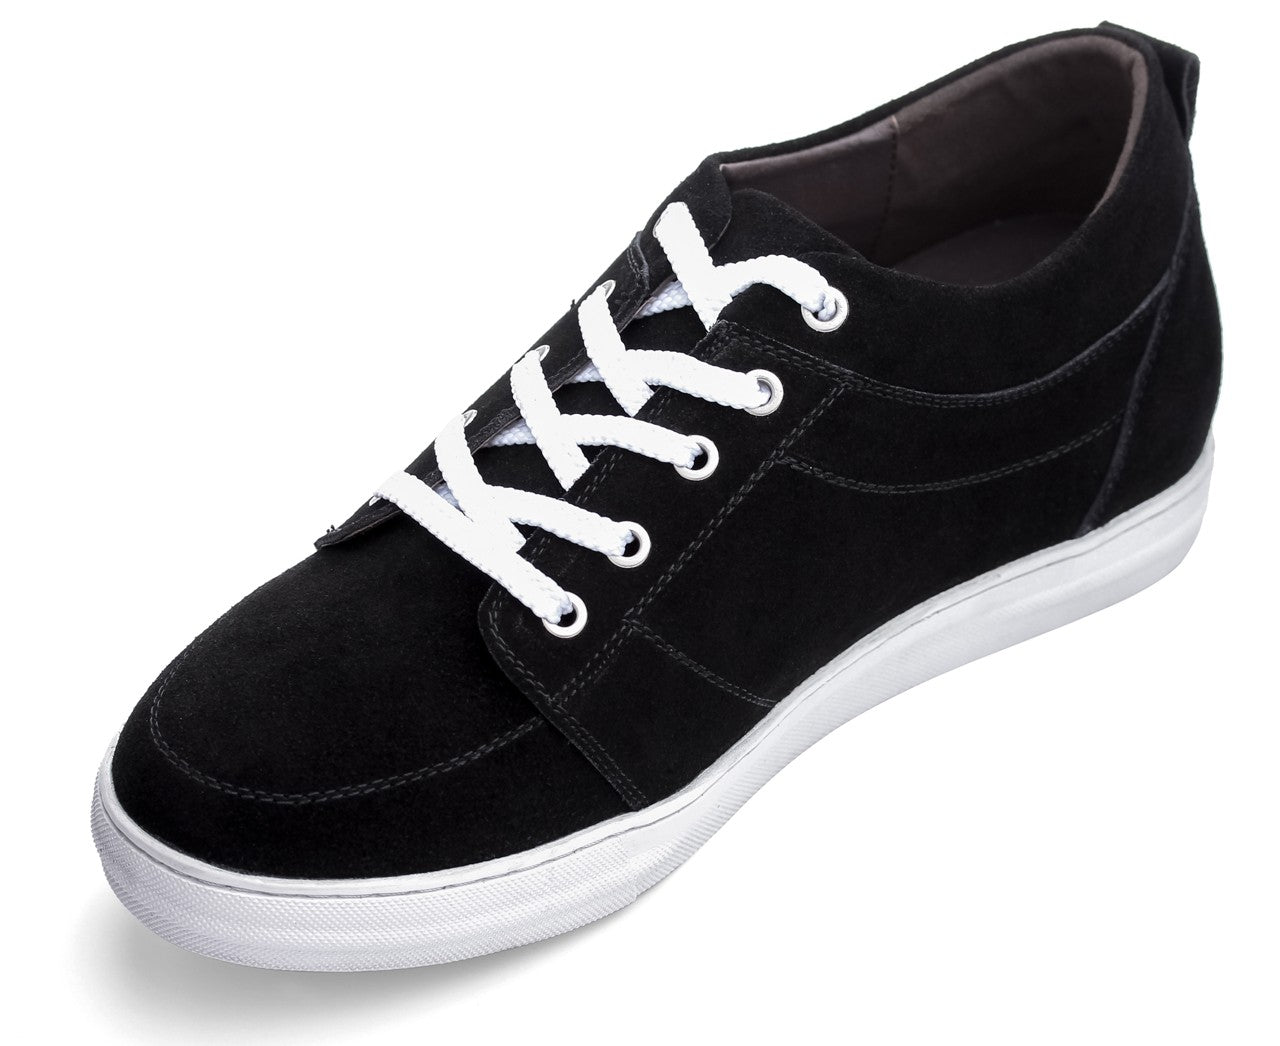 Elevator shoes height increase CALDEN 2.6-Inch Taller Lace-Up Black Elevator Sneakers K4125771